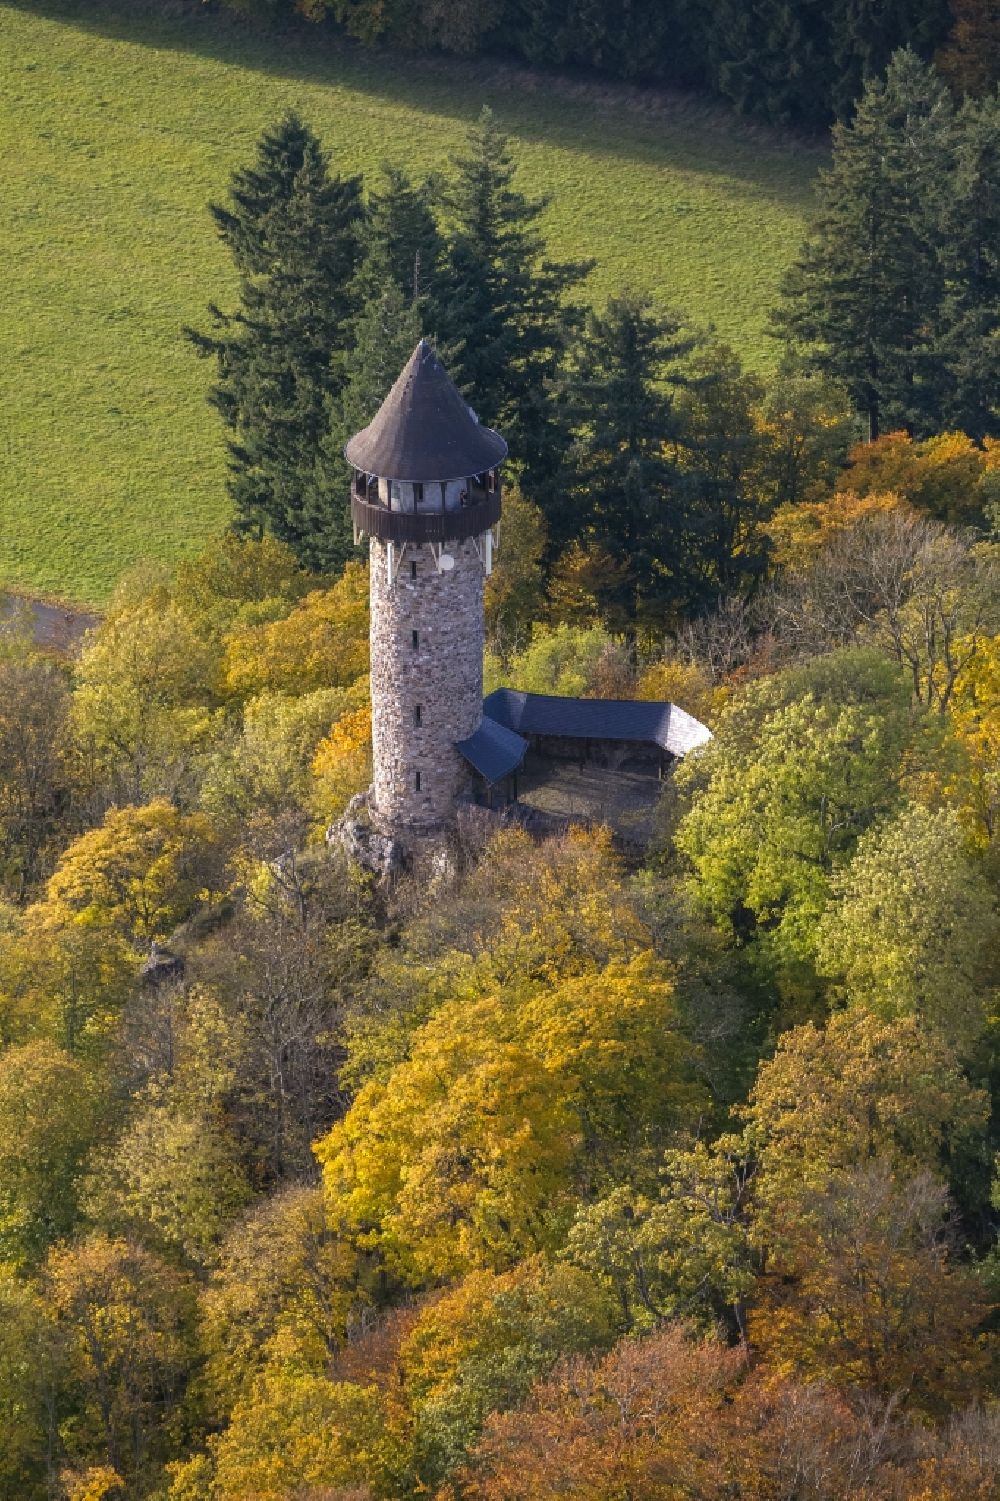 Kempfeld from above - Autumn - Landscape at the tower on the ruins of the castle in the wild nature reserve Wildenburg near Kempfeld in Rhineland-Palatinate